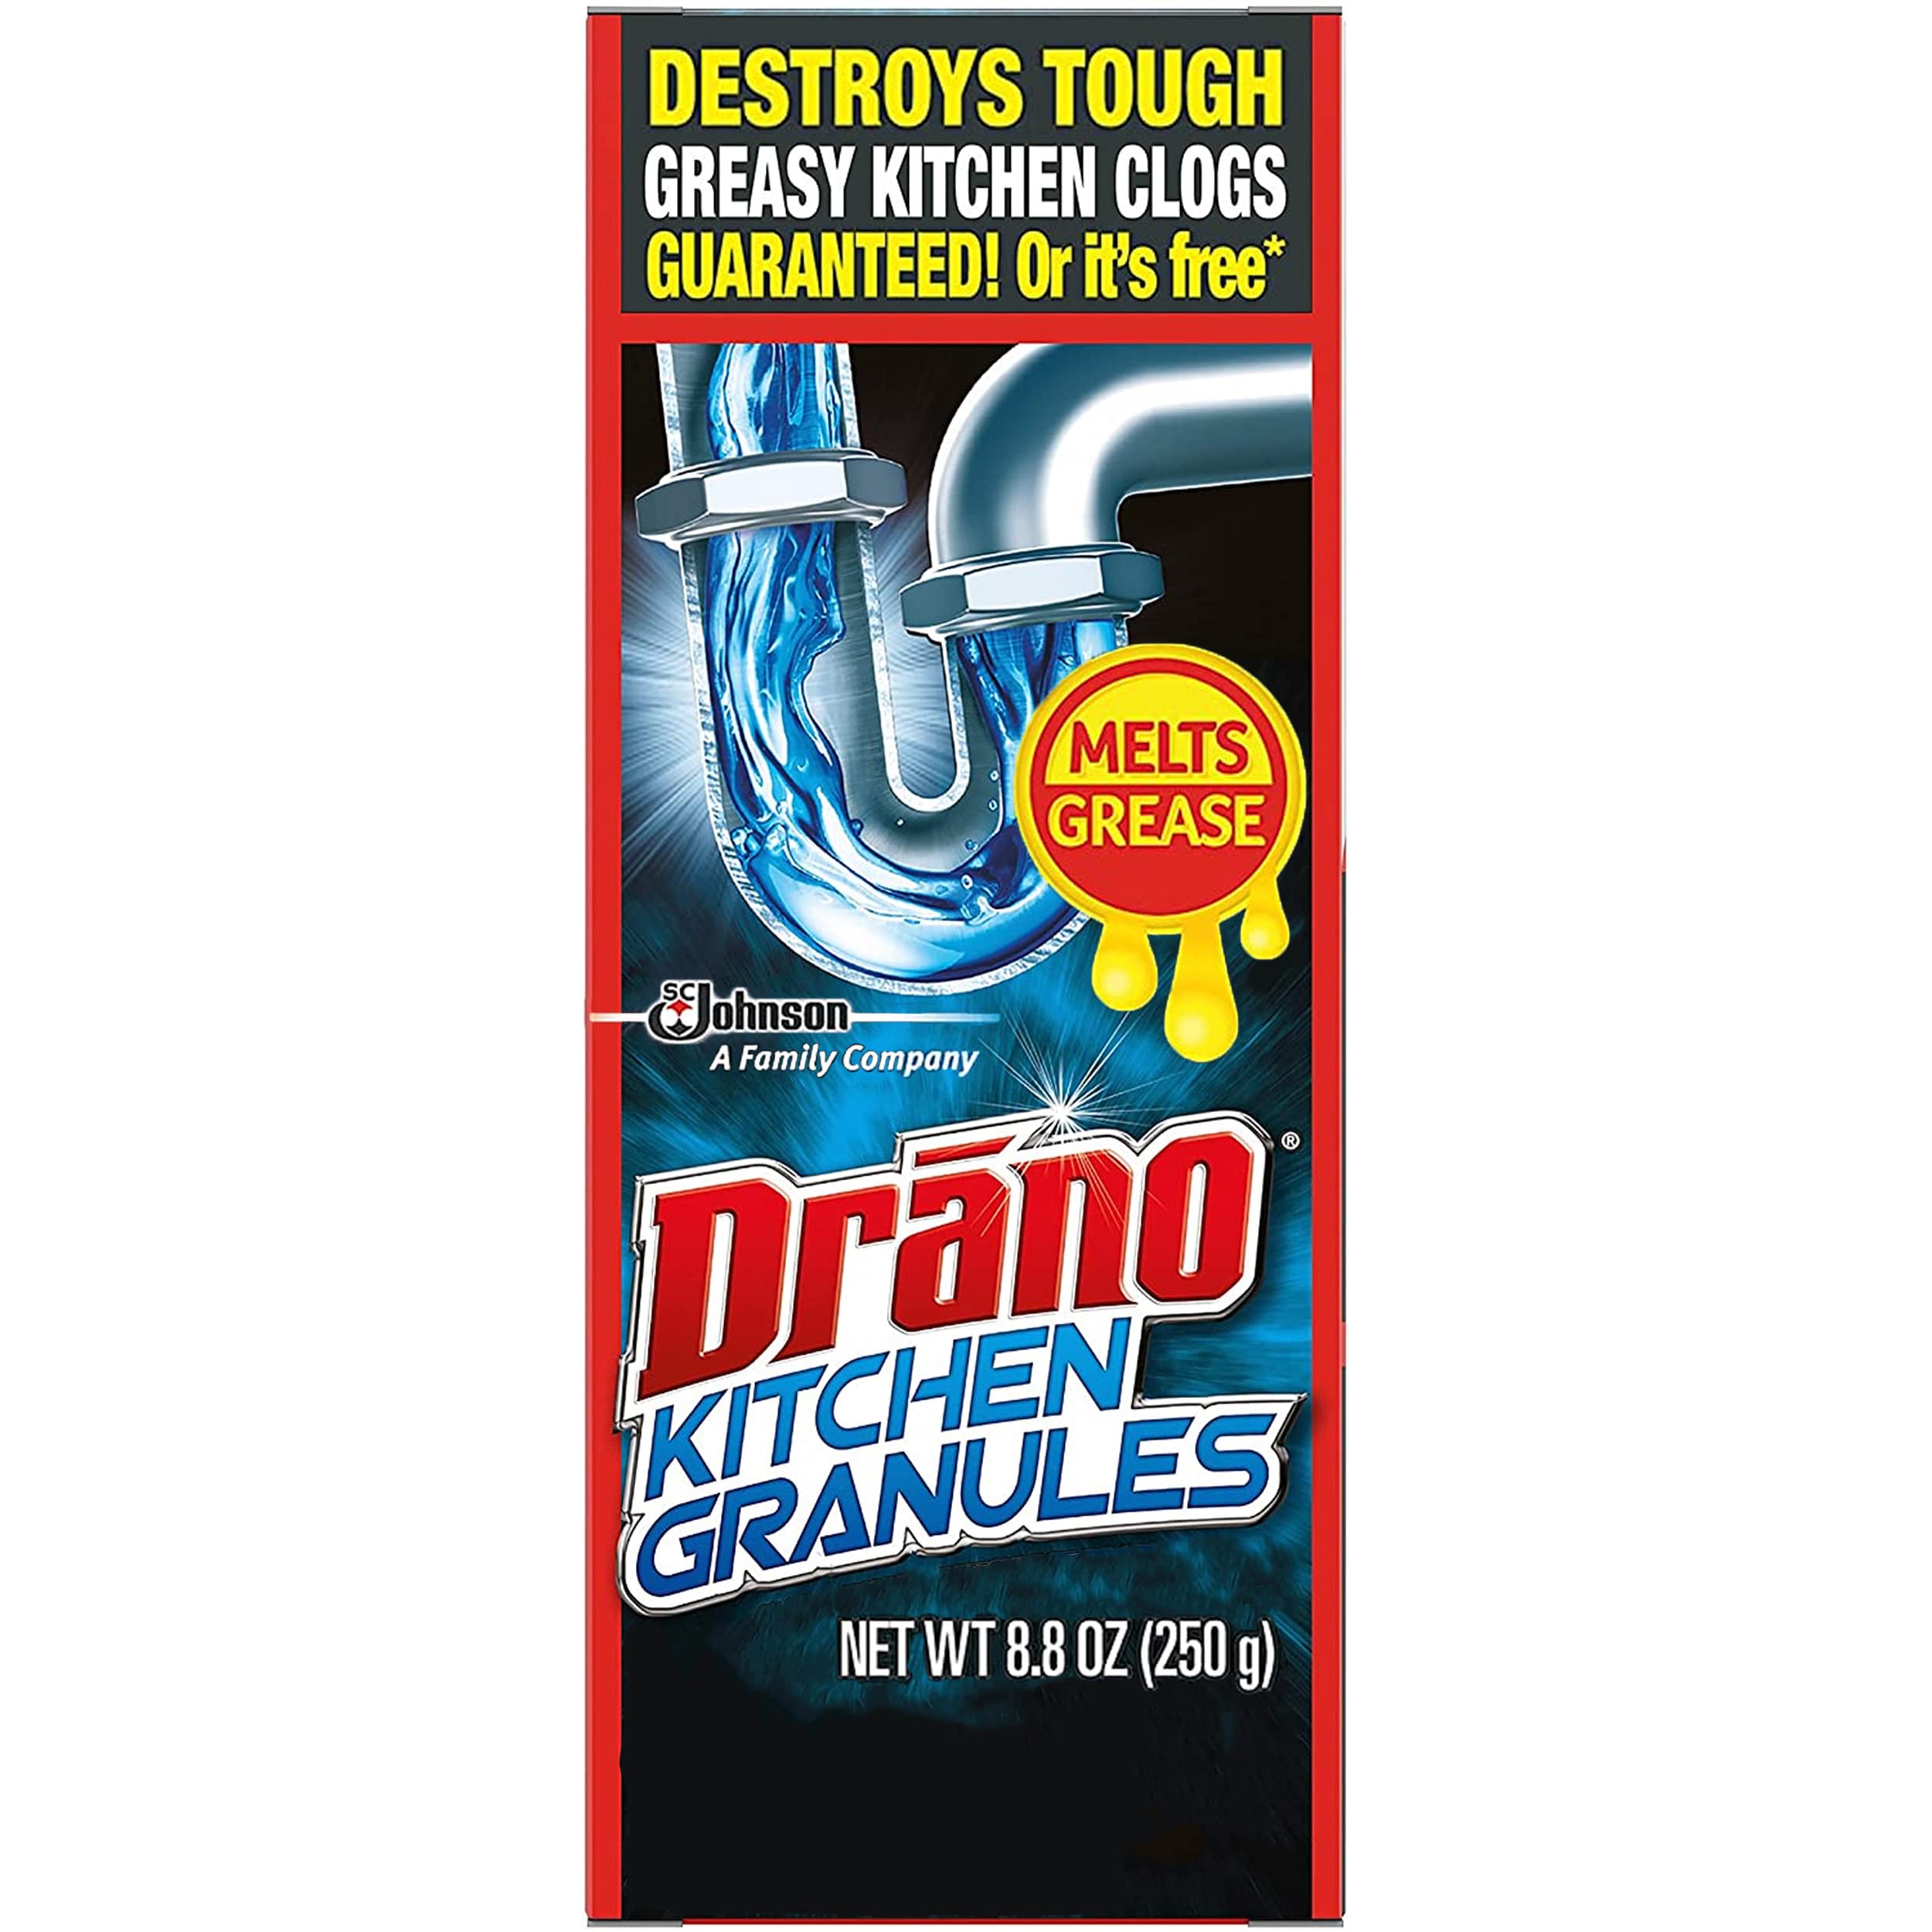 8.8-Oz Drano Kitchen Granules Drain Clog Remover & Cleaner $3.15 w/ S&S + Free Shipping w/ Prime or on $35+